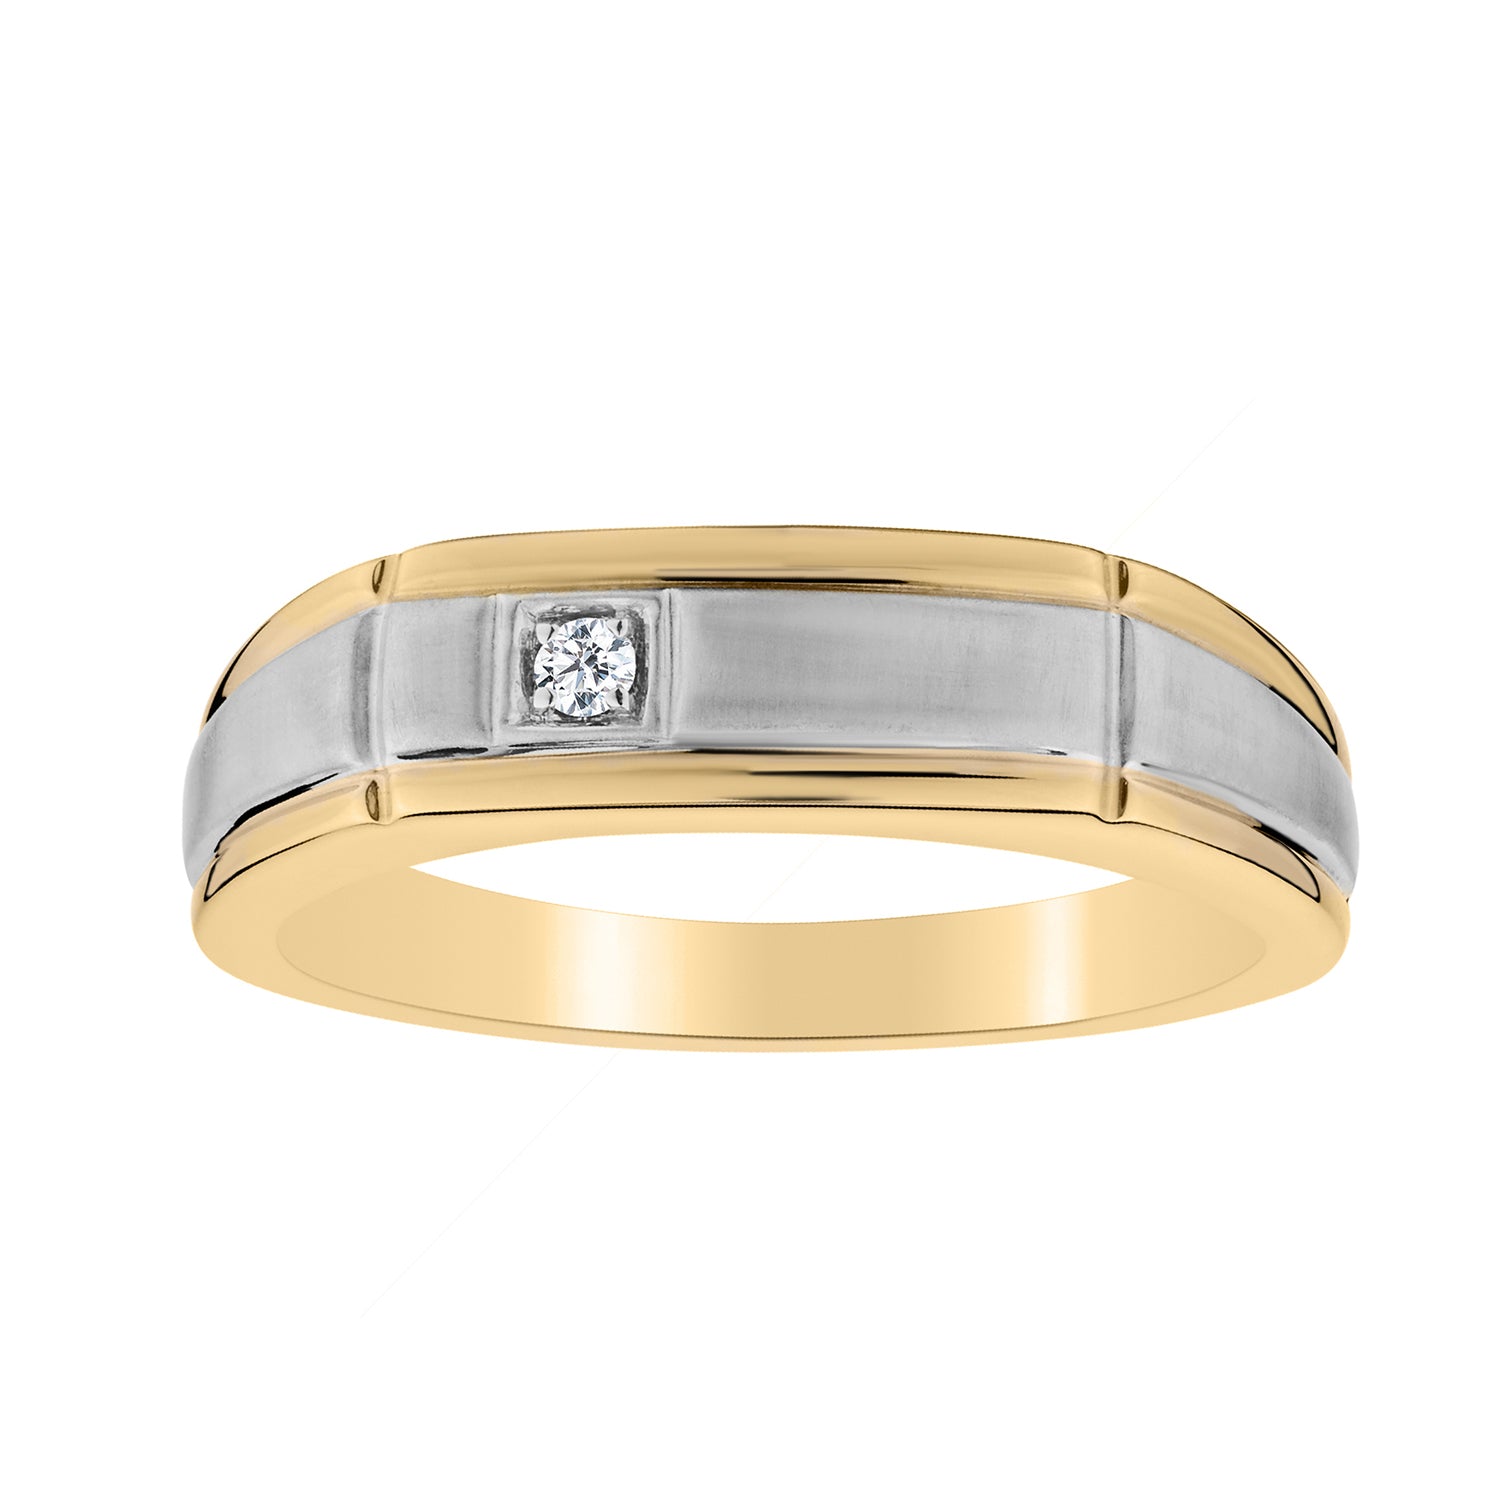 .05 Carat Diamond Gentleman's Ring, 10kt White And Yellow Gold (Two Tone)......................Now - Griffin Jewellery Designs